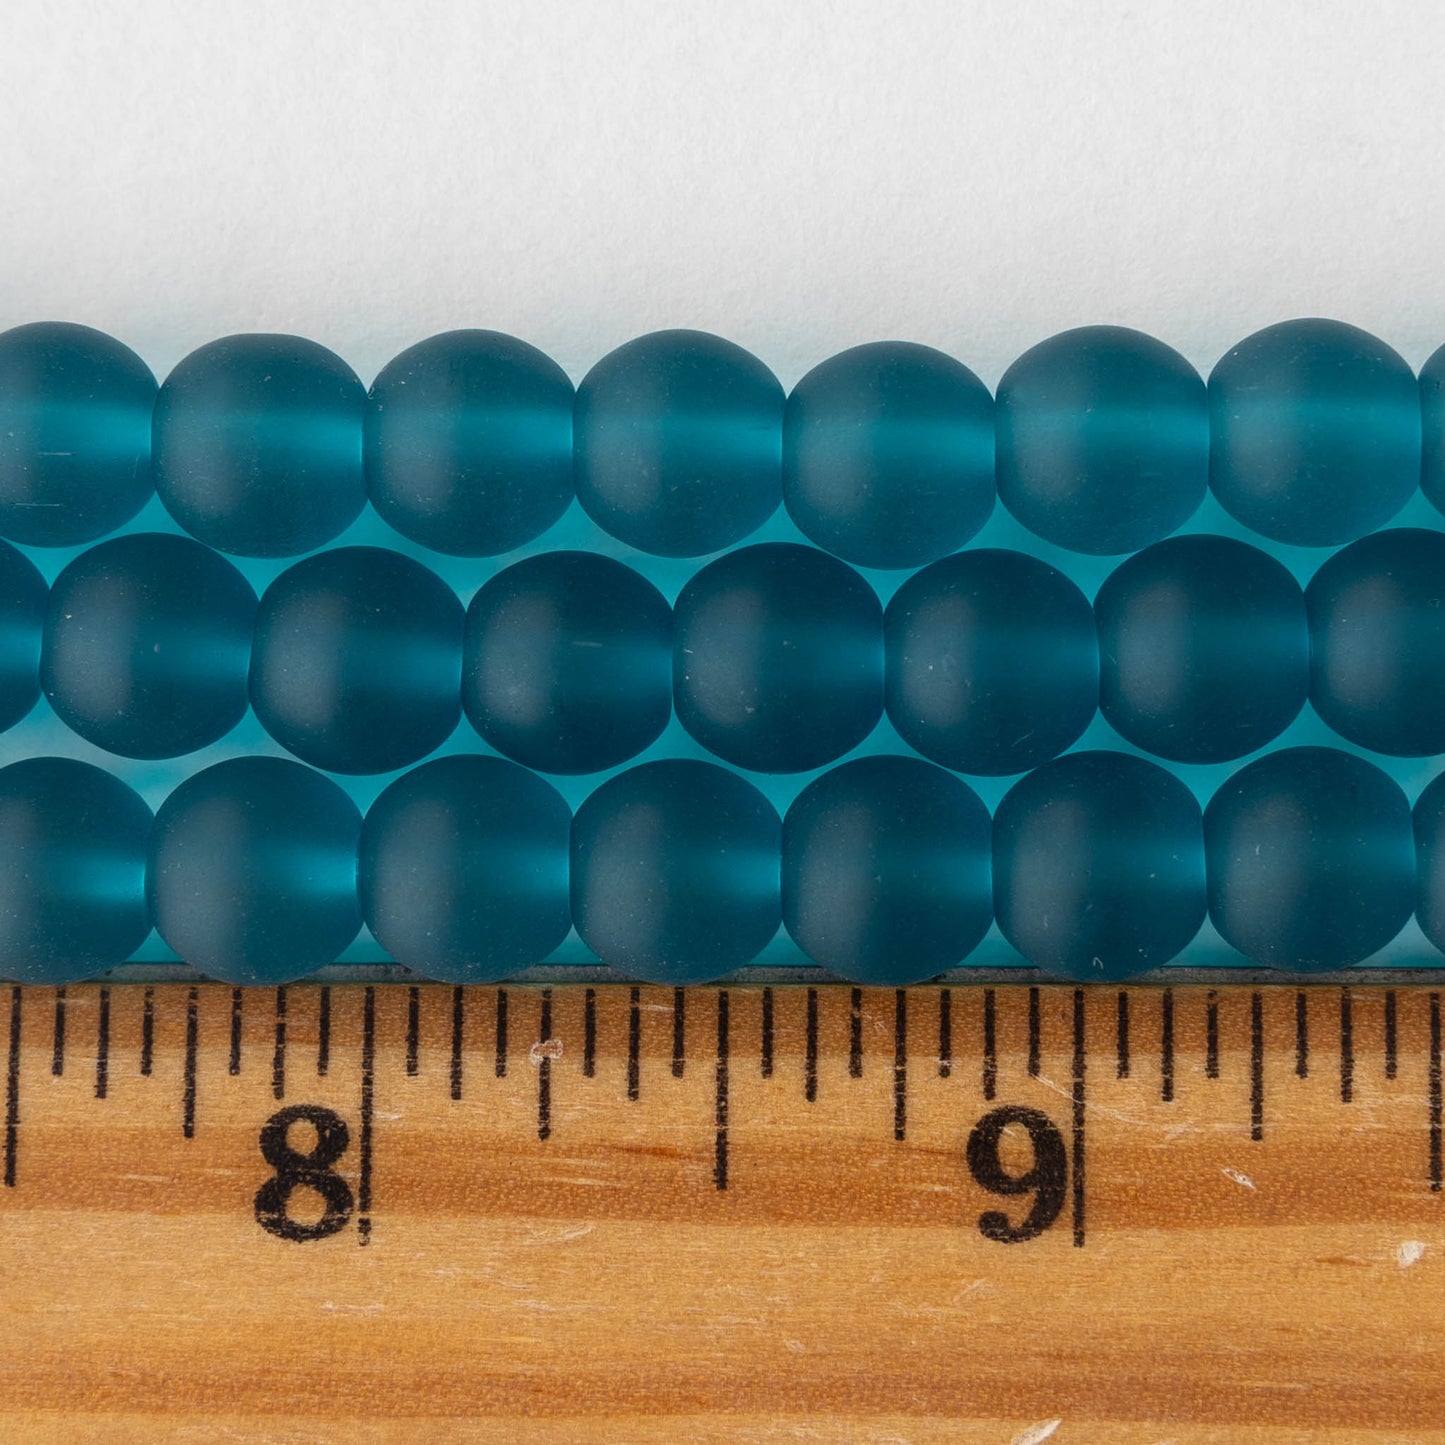 8mm Frosted Glass Rounds - Teal - 16 Inches